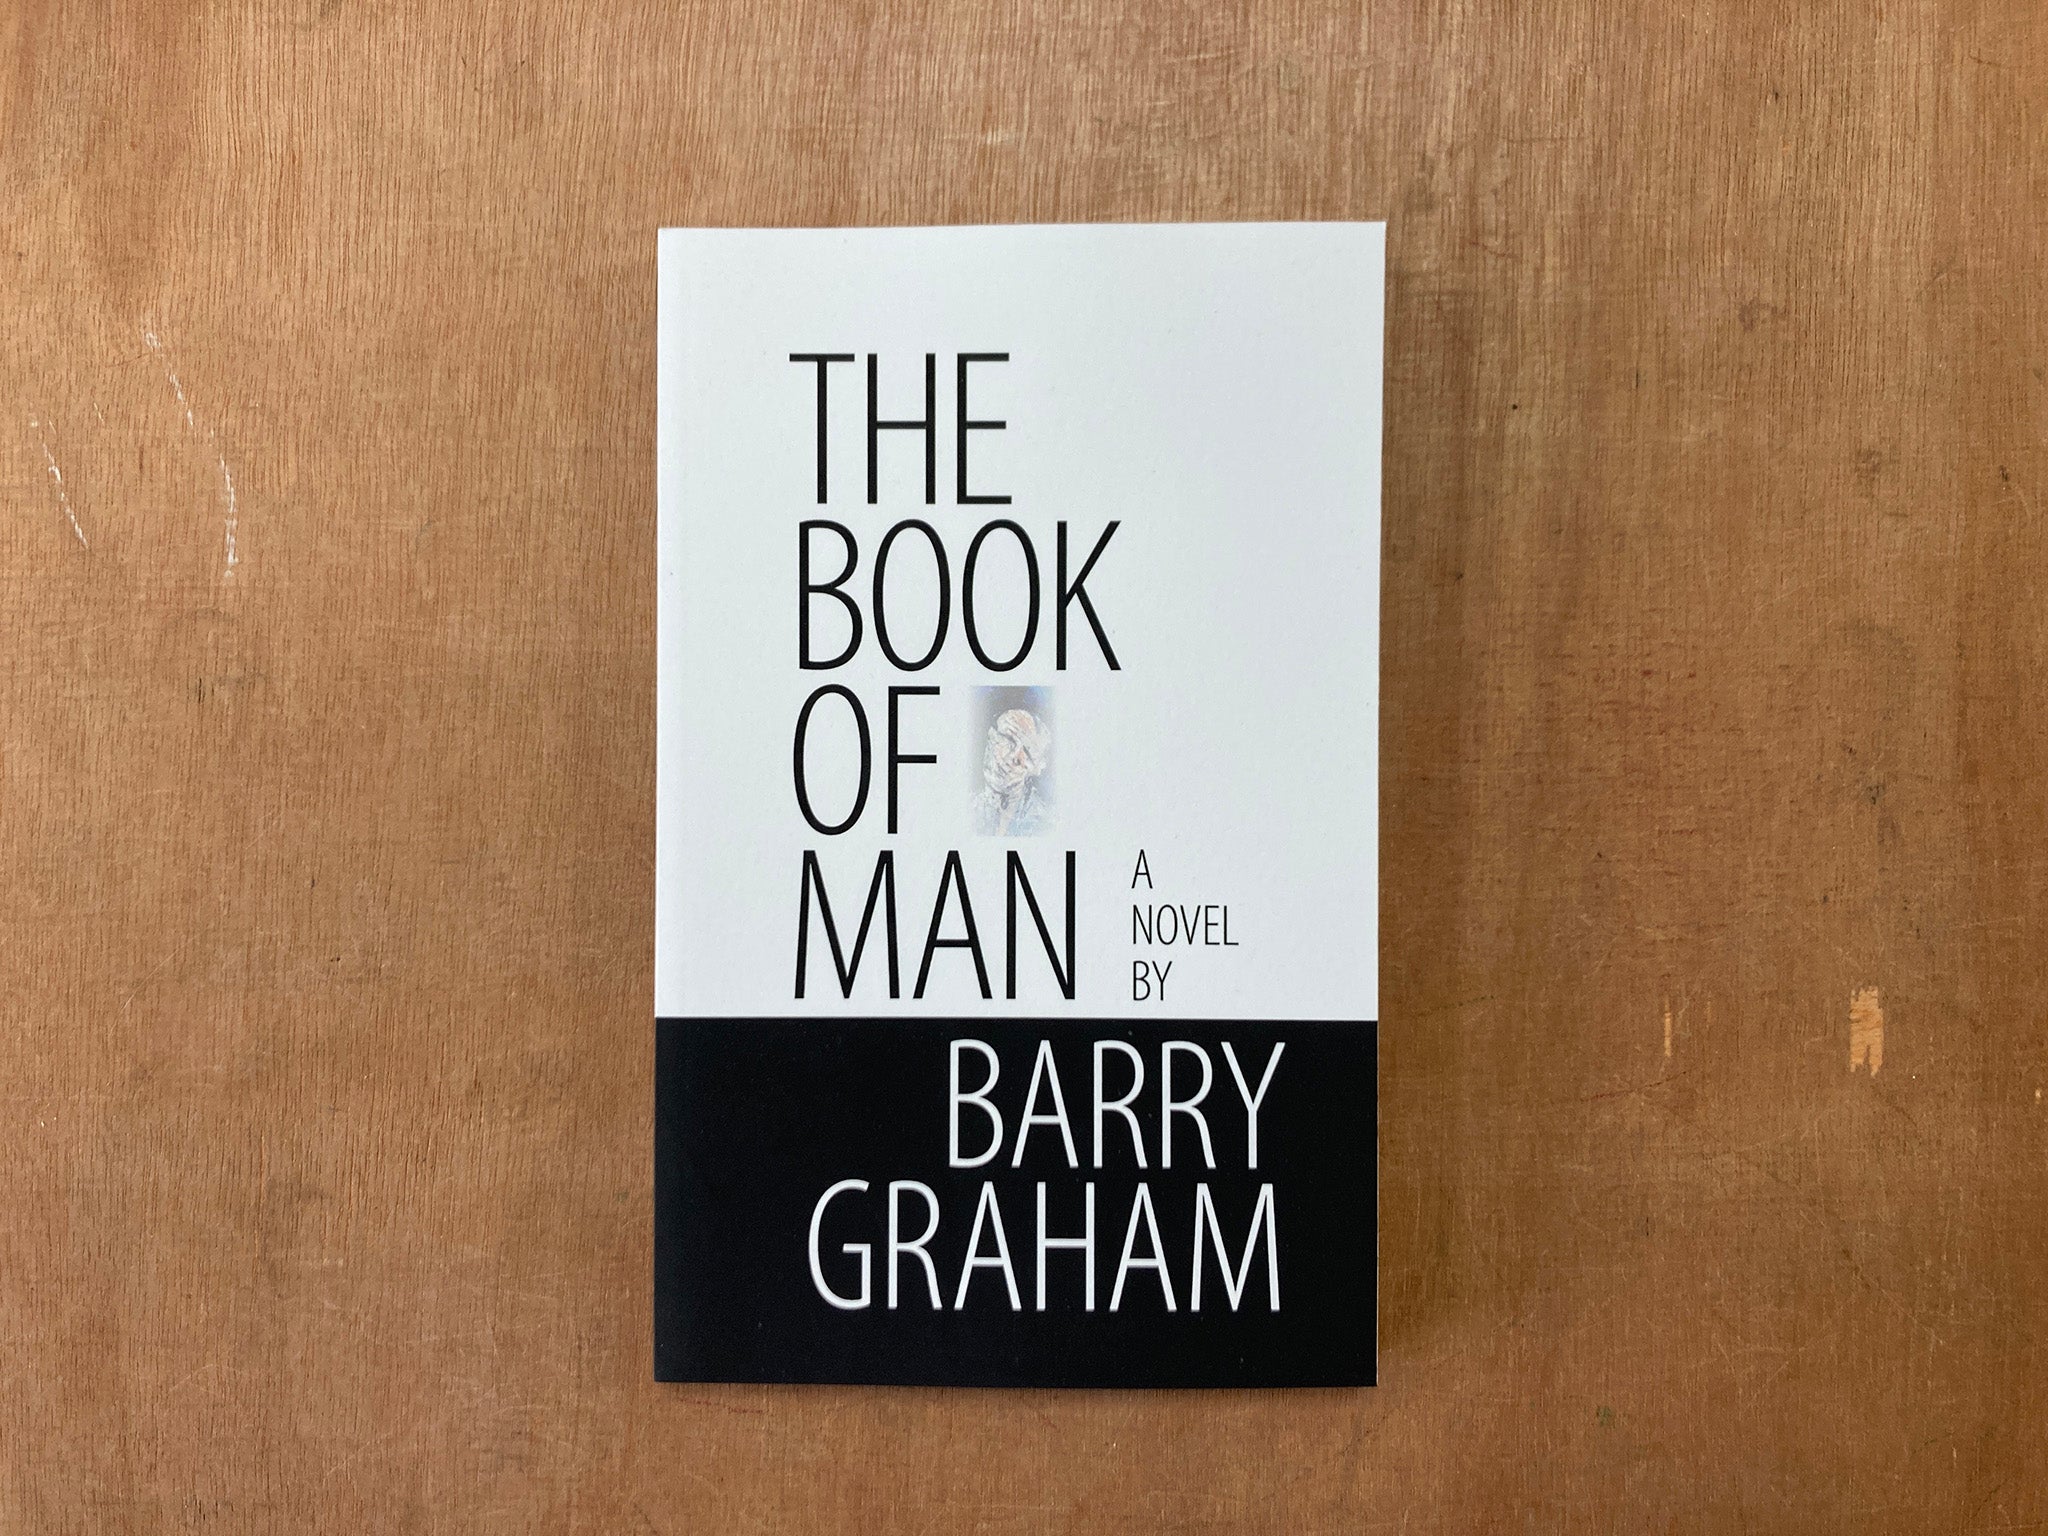 THE BOOK OF MAN by Barry Graham